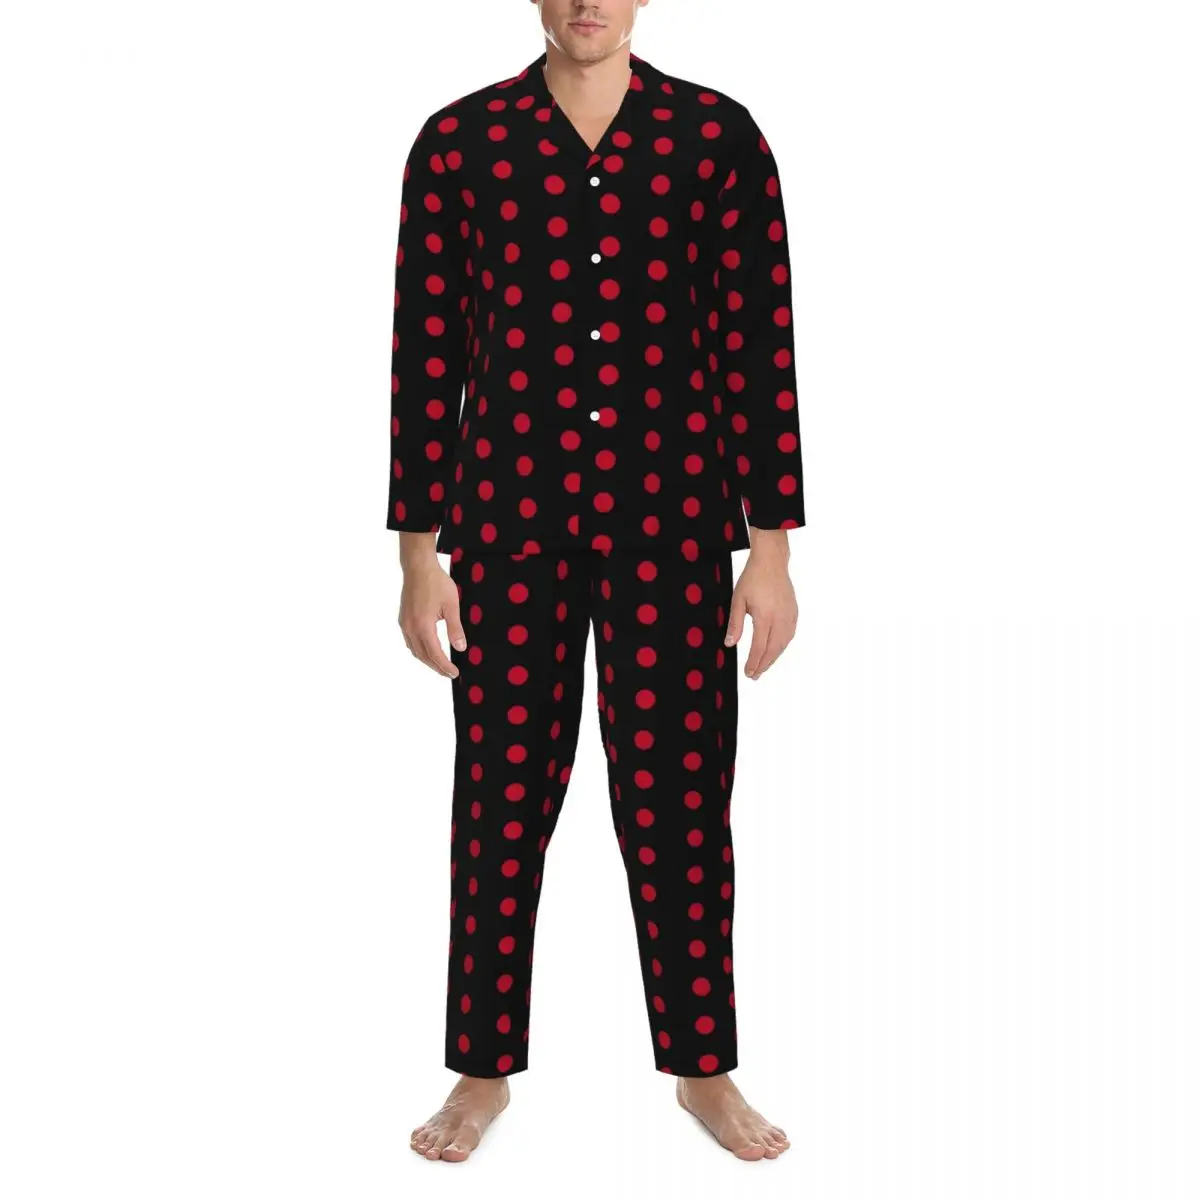 

Black With Red Polka Dot Pajamas Men Dotted 70S Vintage Soft Home Sleepwear Autumn 2 Pieces Aesthetic Oversized Design Home Suit